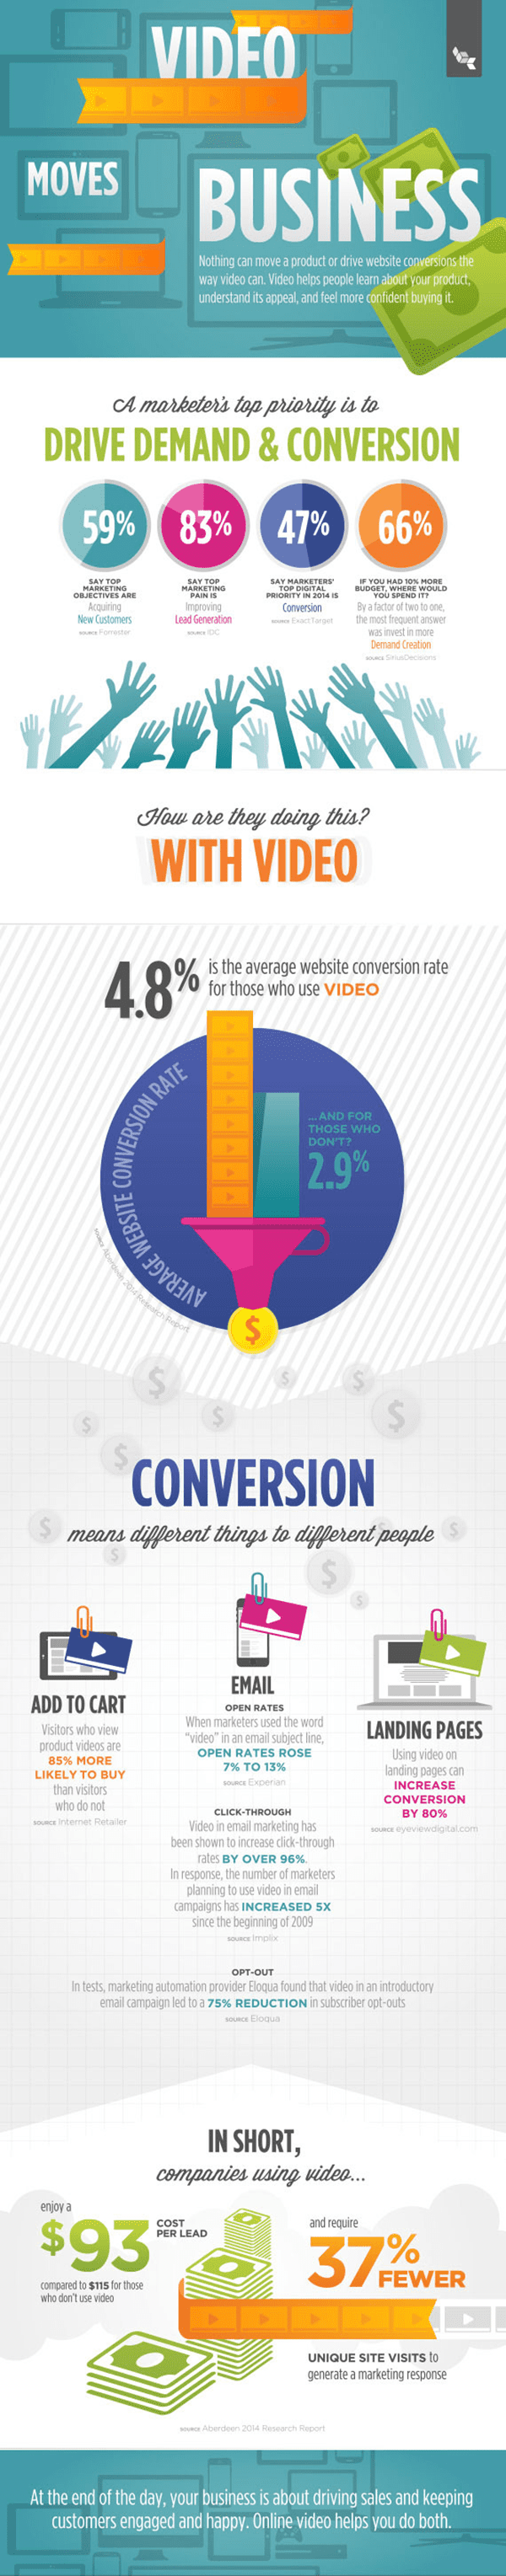 BOOST-CONVERSION-RATES